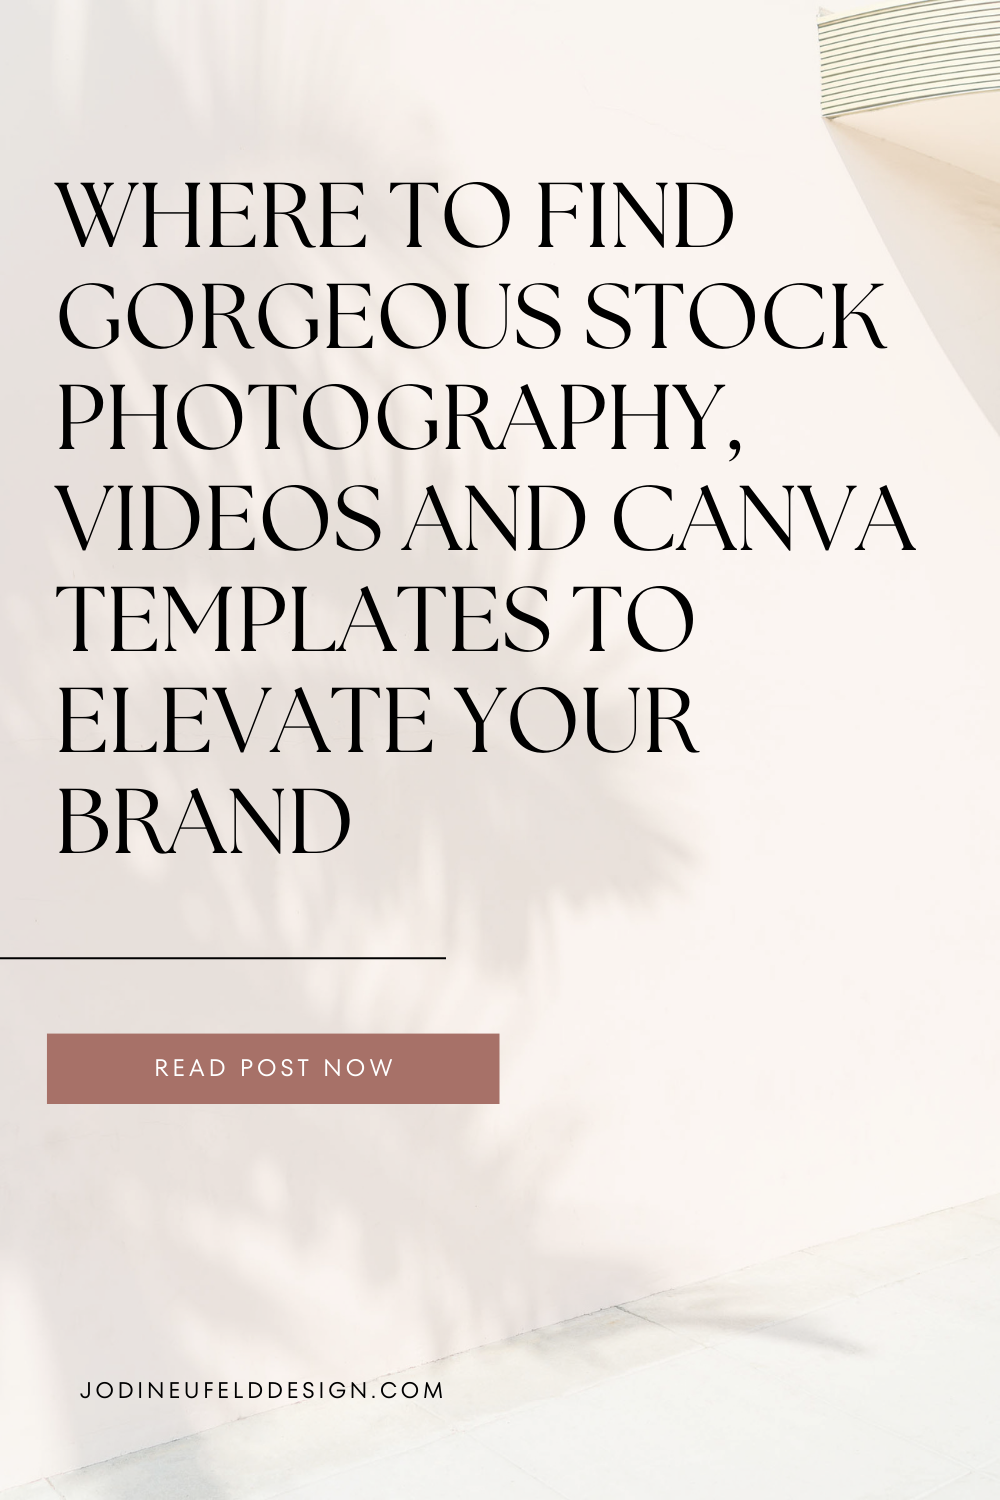 Where to find amazing stock photos, videos and Canva templates all in one place! | Jodi Neufeld Design | PIN 3.png